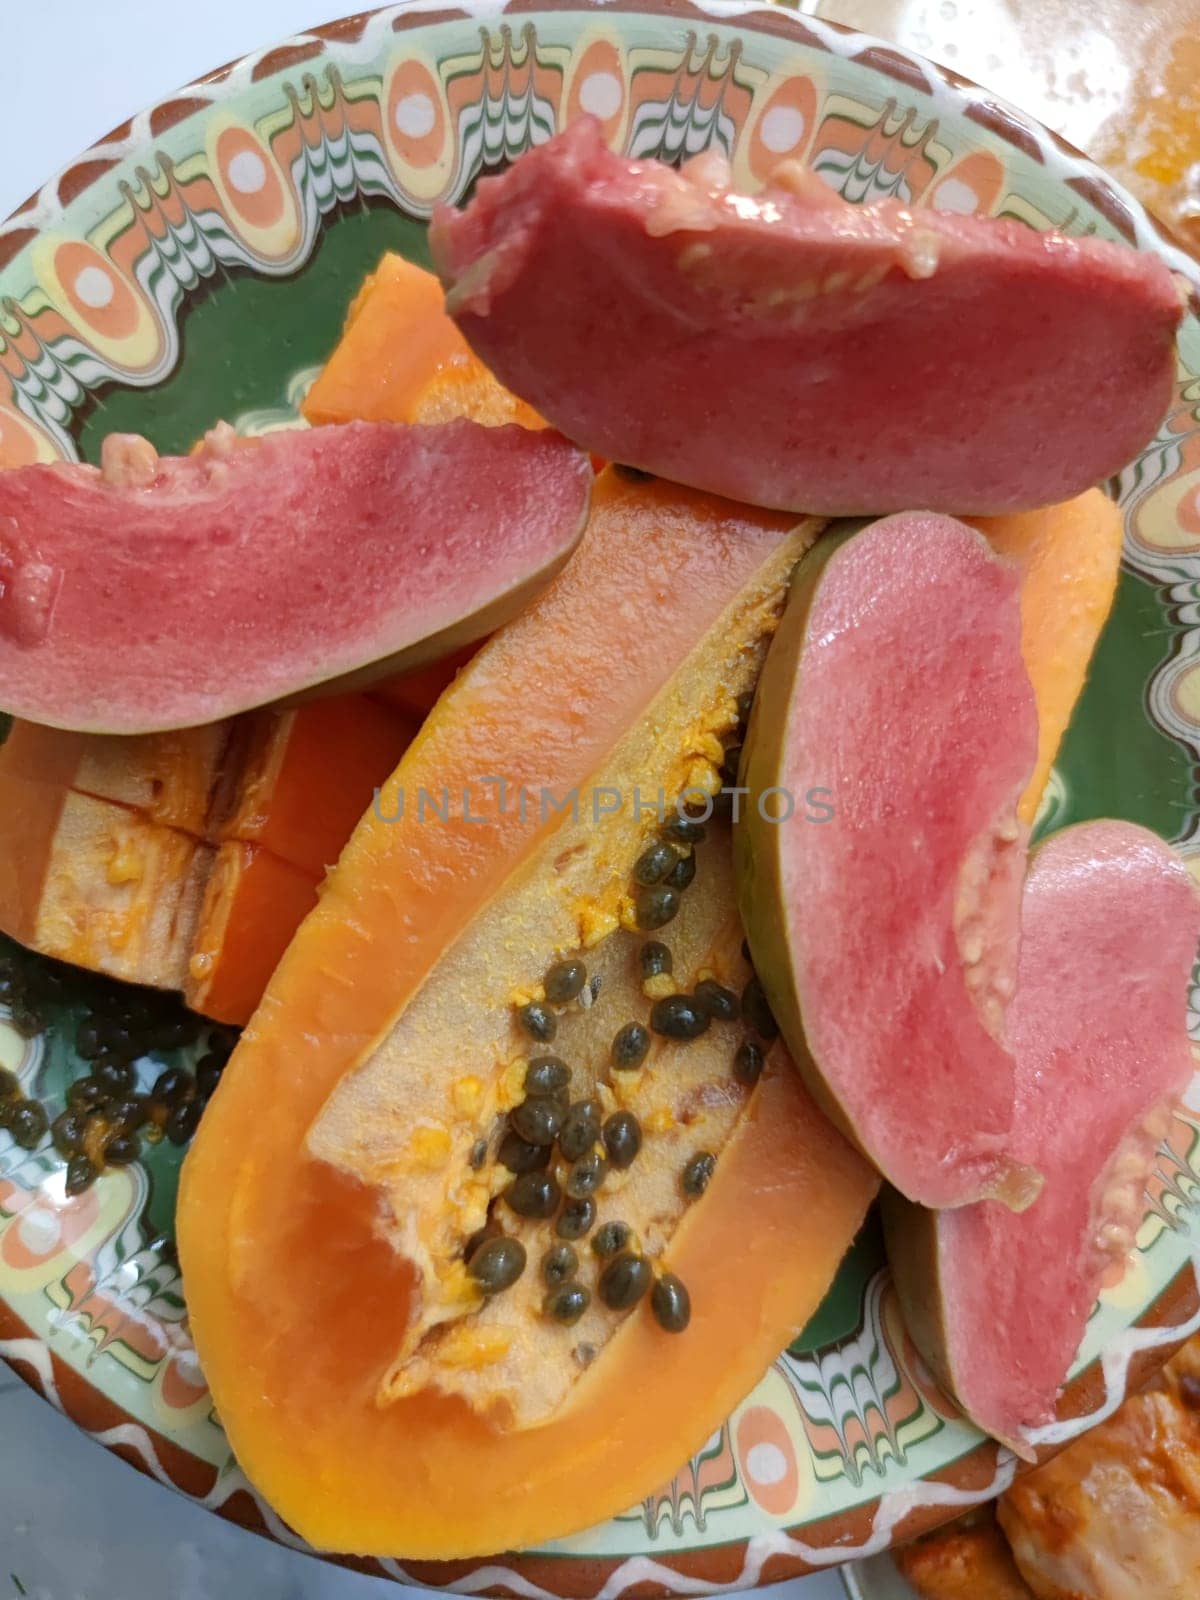 sliced papaya and guava on a patterned ceramic plate by Annado